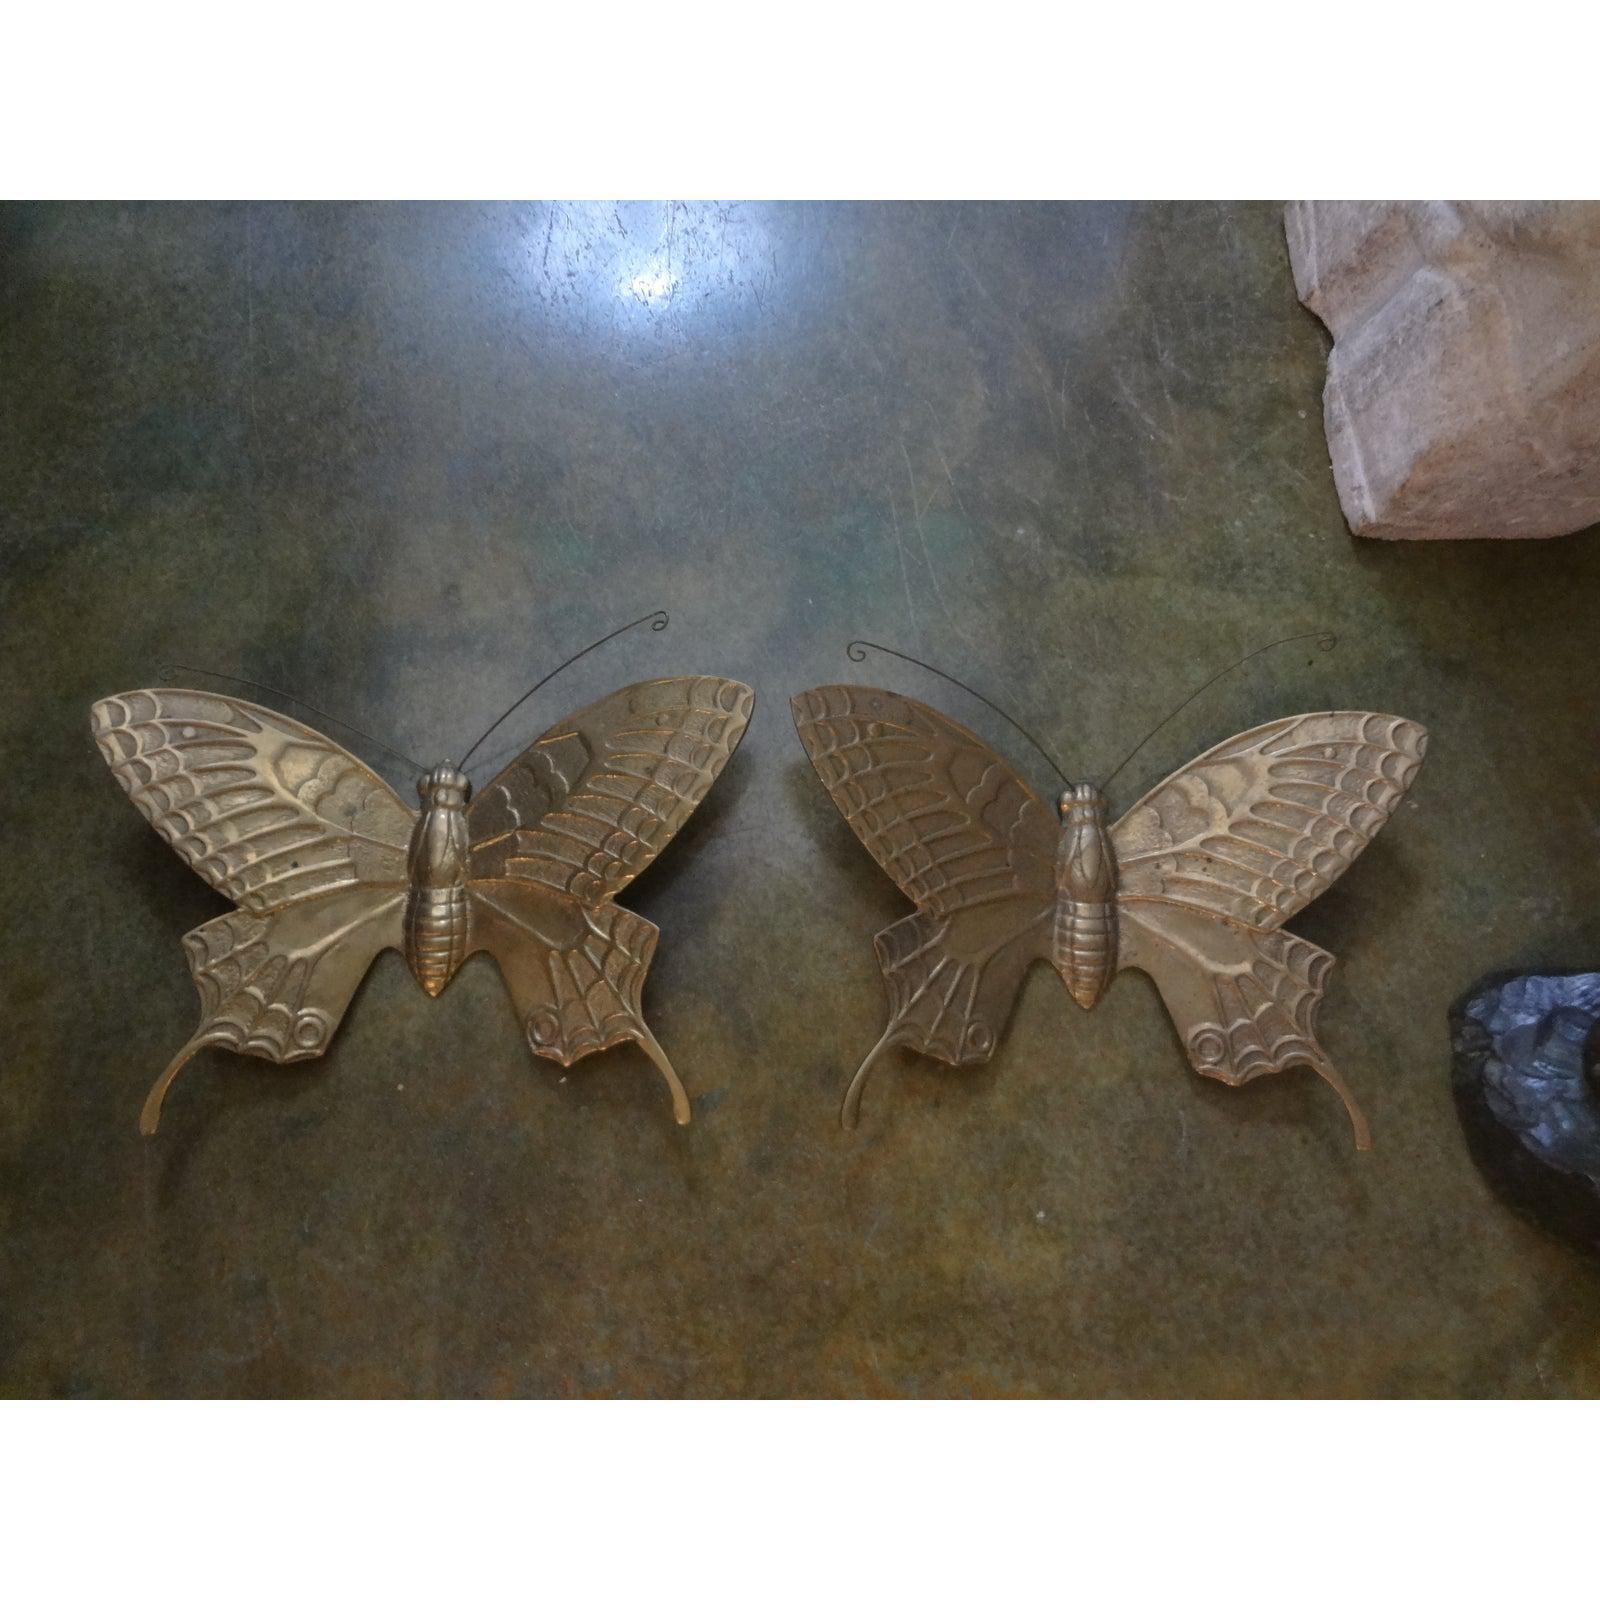 Great pair of midcentury brass butterfly wall sculptures. This matching pair of vintage Curtis Jere style brass butterflies would look great mounted on a wall, sitting on a table or in a bookcase. Would be fabulous converted into a pair of wall